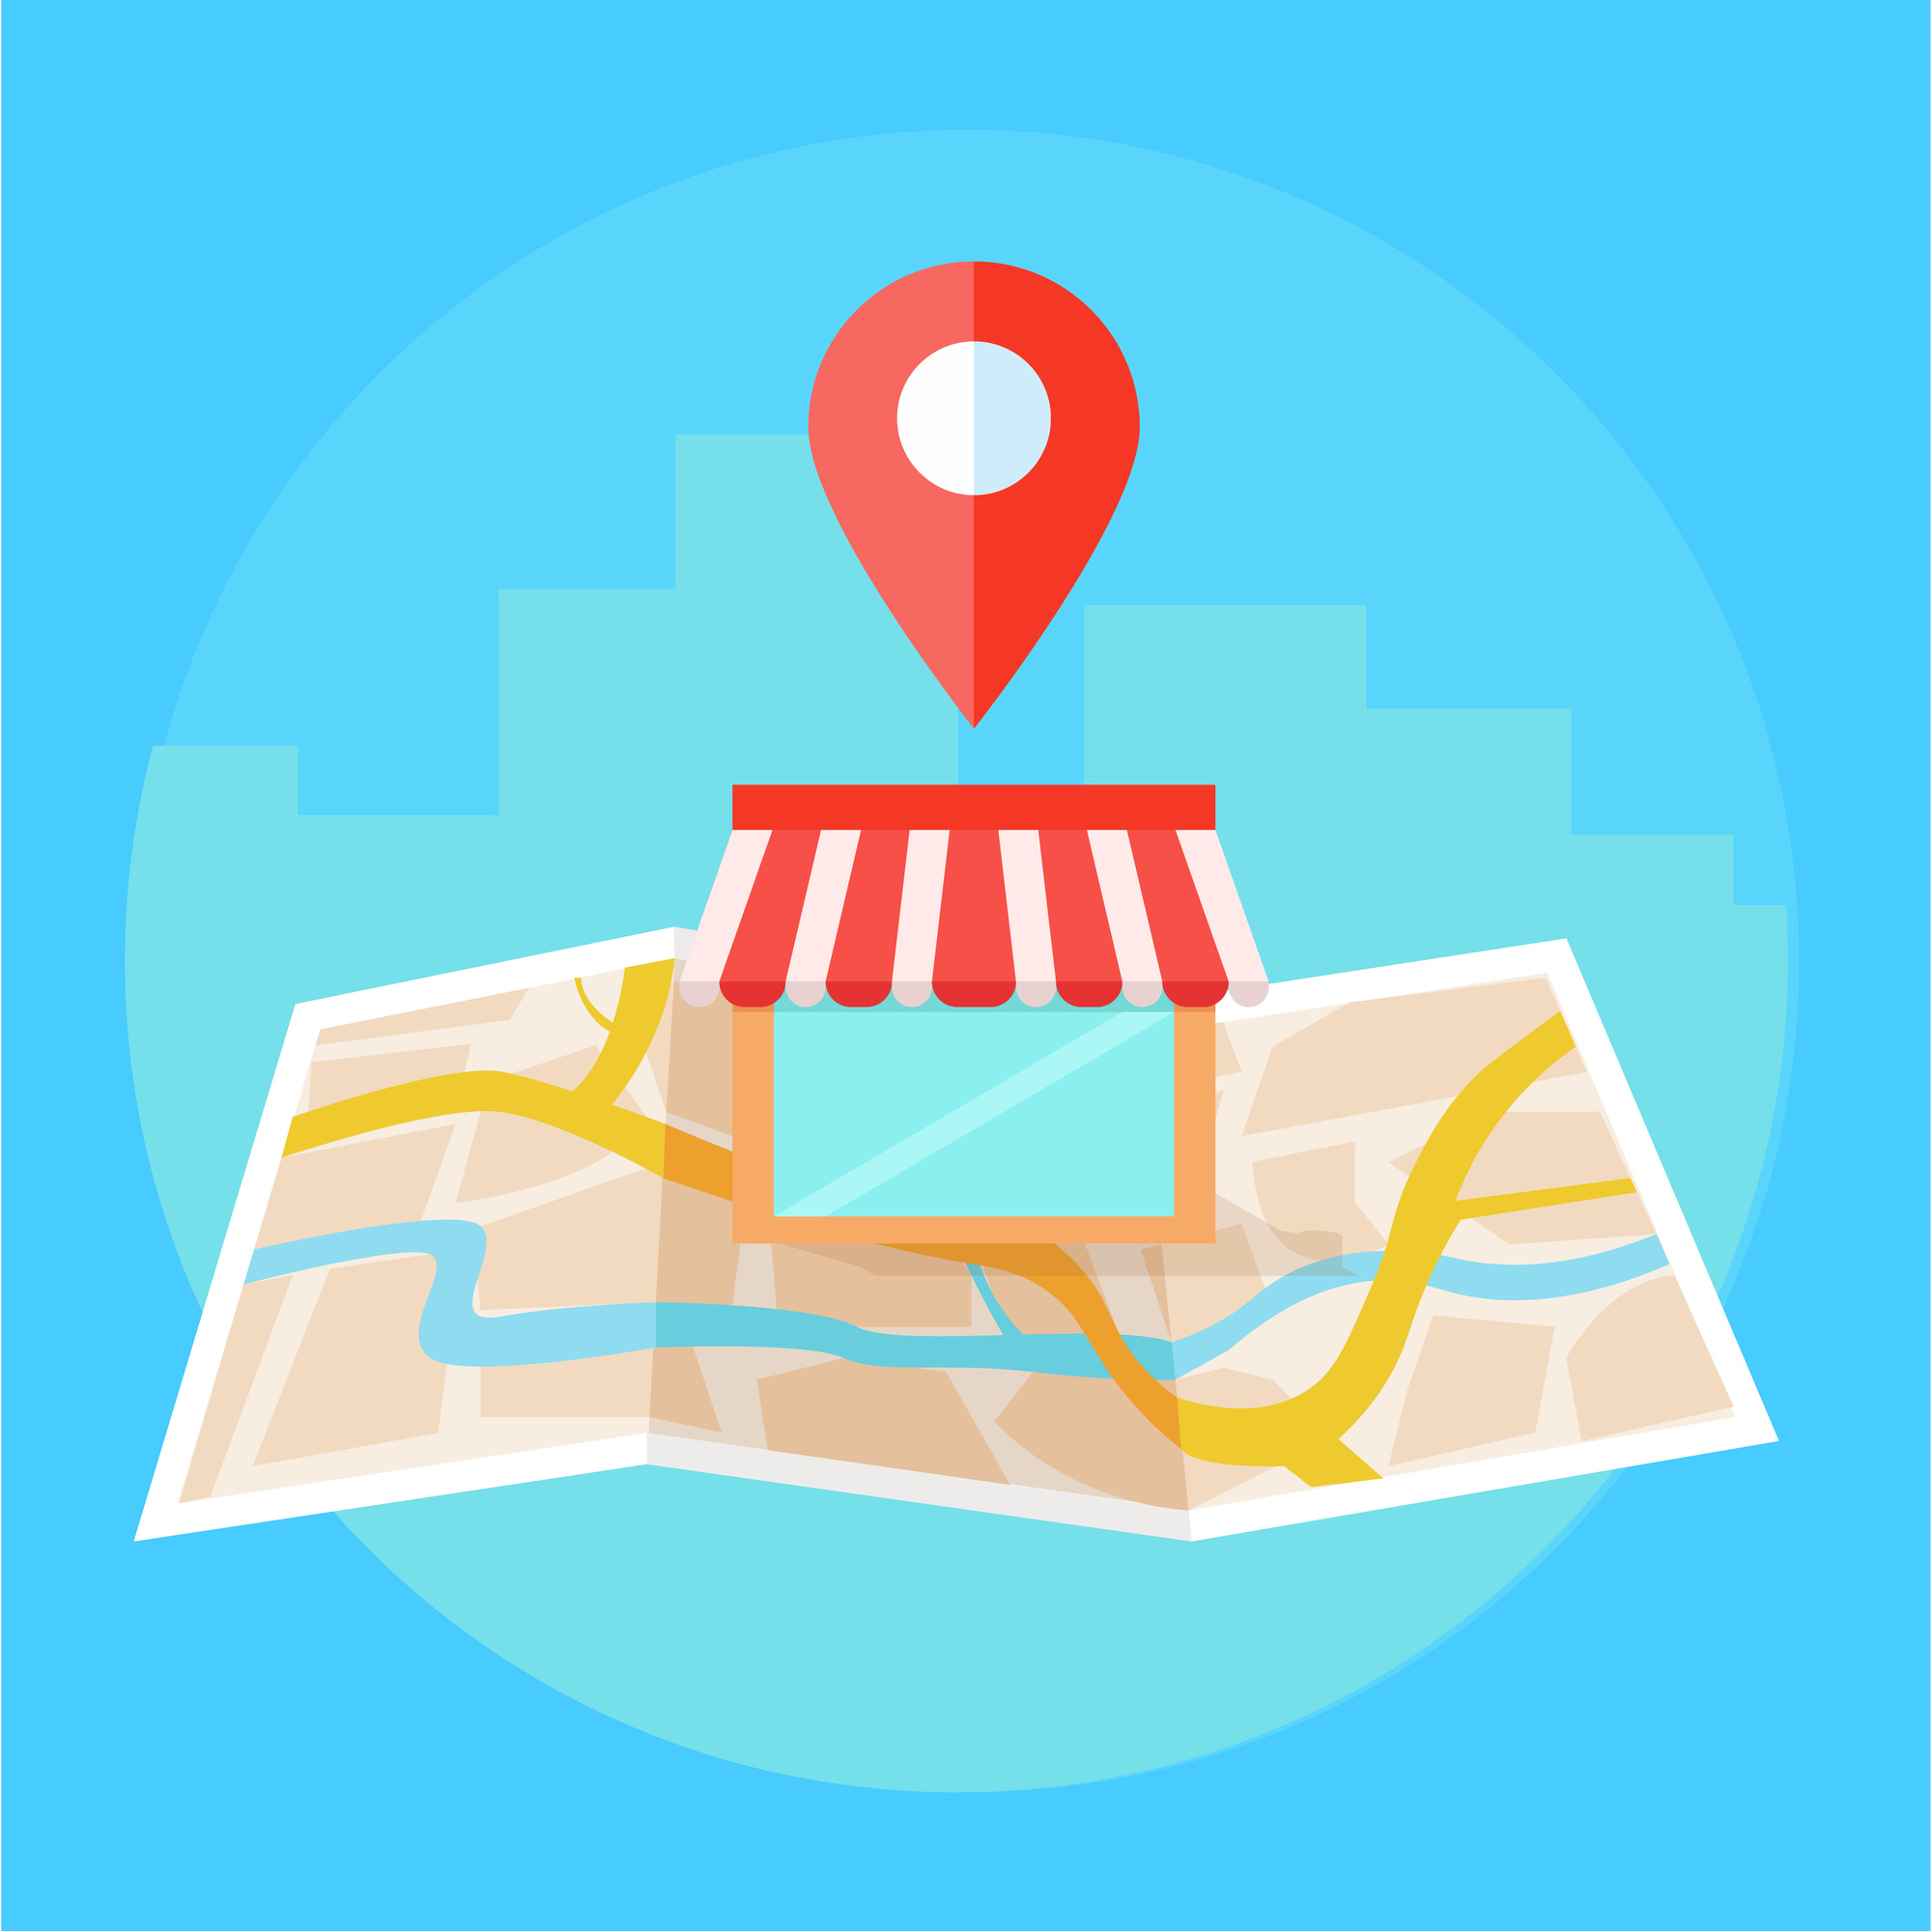 Best Local Seo Services